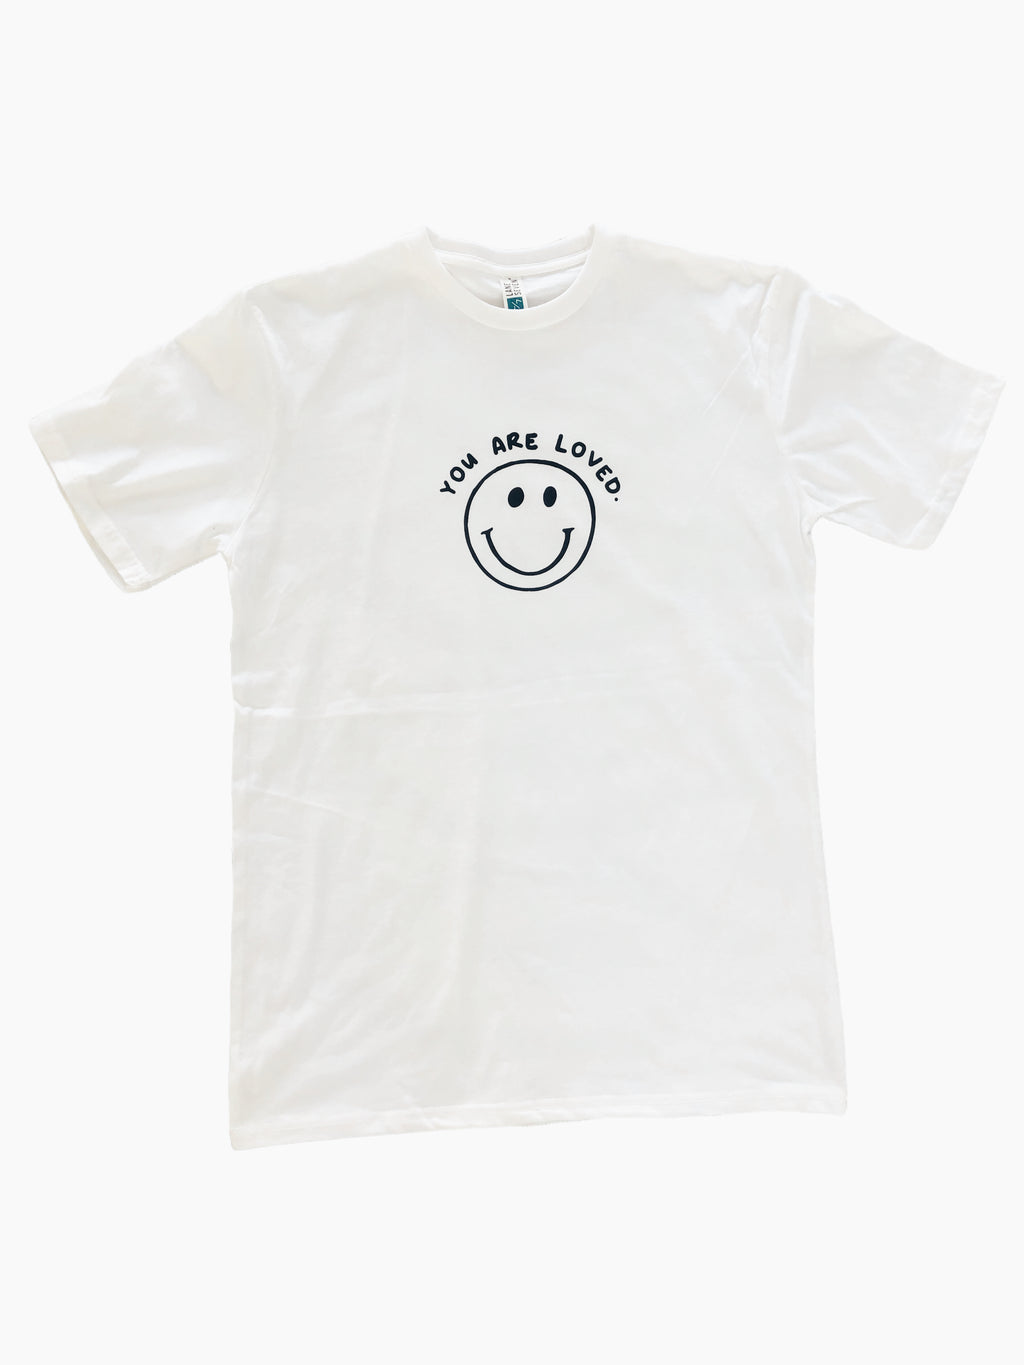 YOU ARE LOVED SMILEY FACE WHITE SLEEVE T-SHIRT